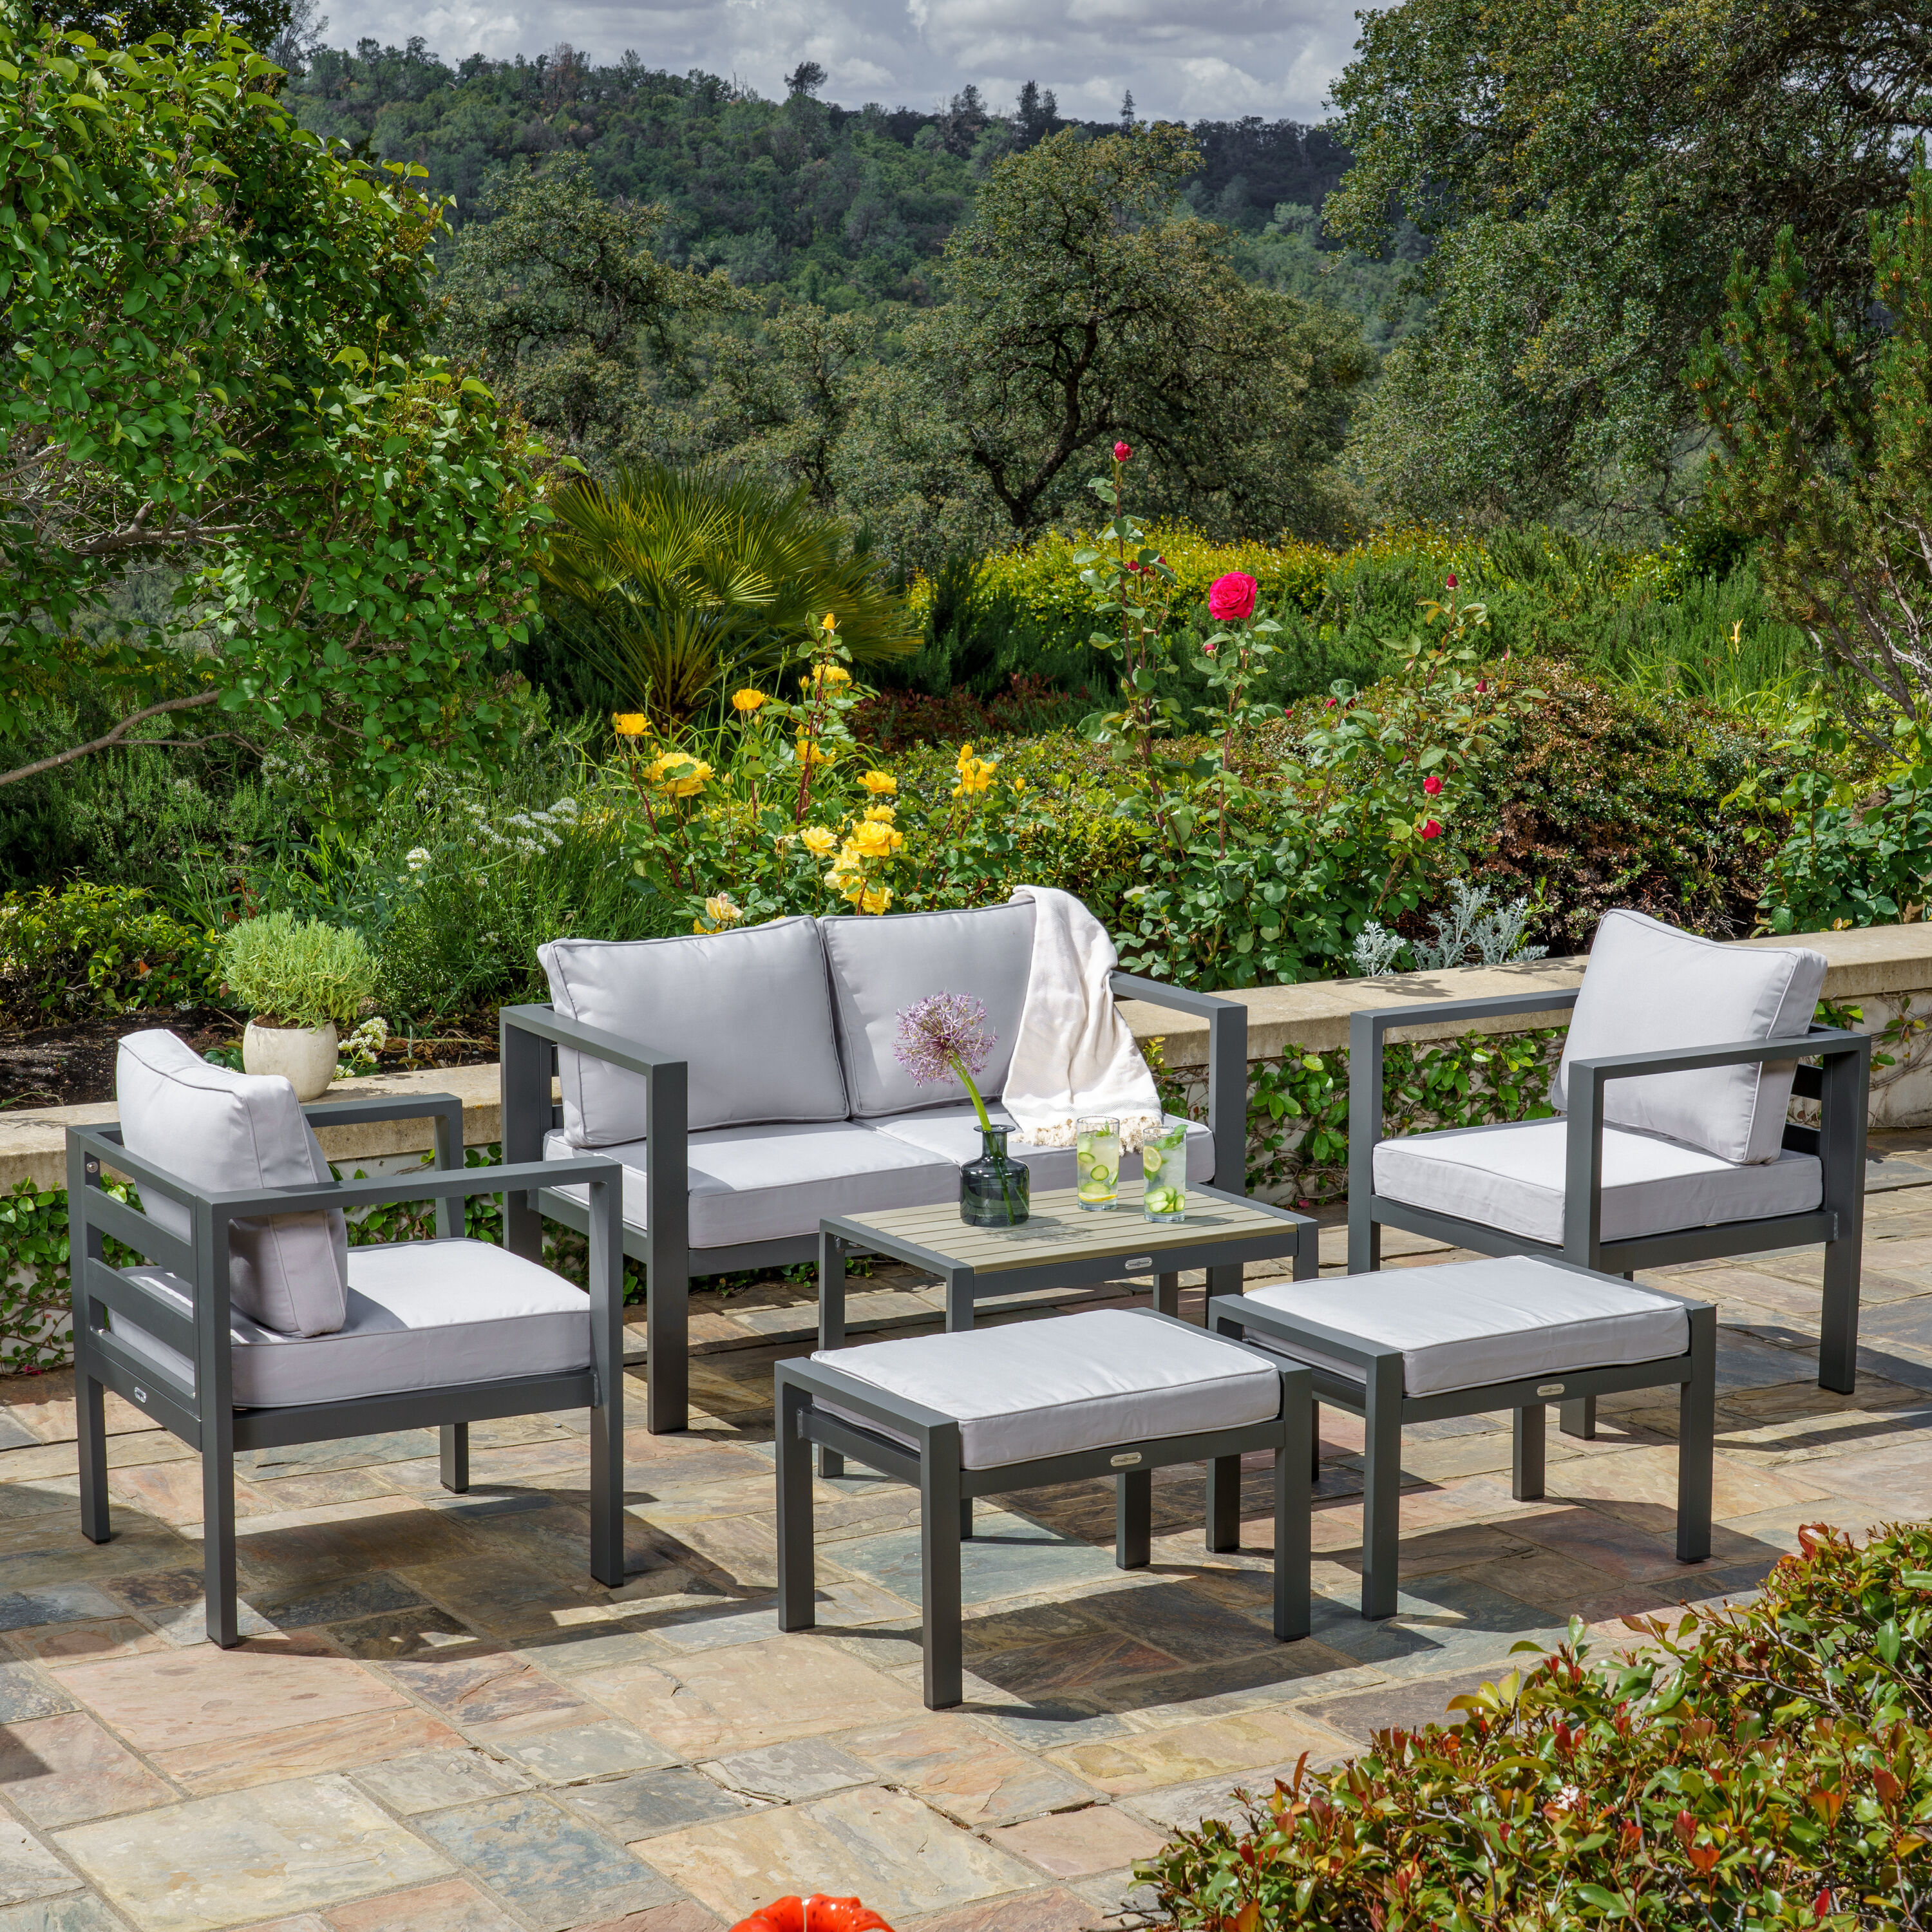 Tortuga Outdoor Lakeview, 6-Pc Conv. Set - Grey/Grey in the Patio ...